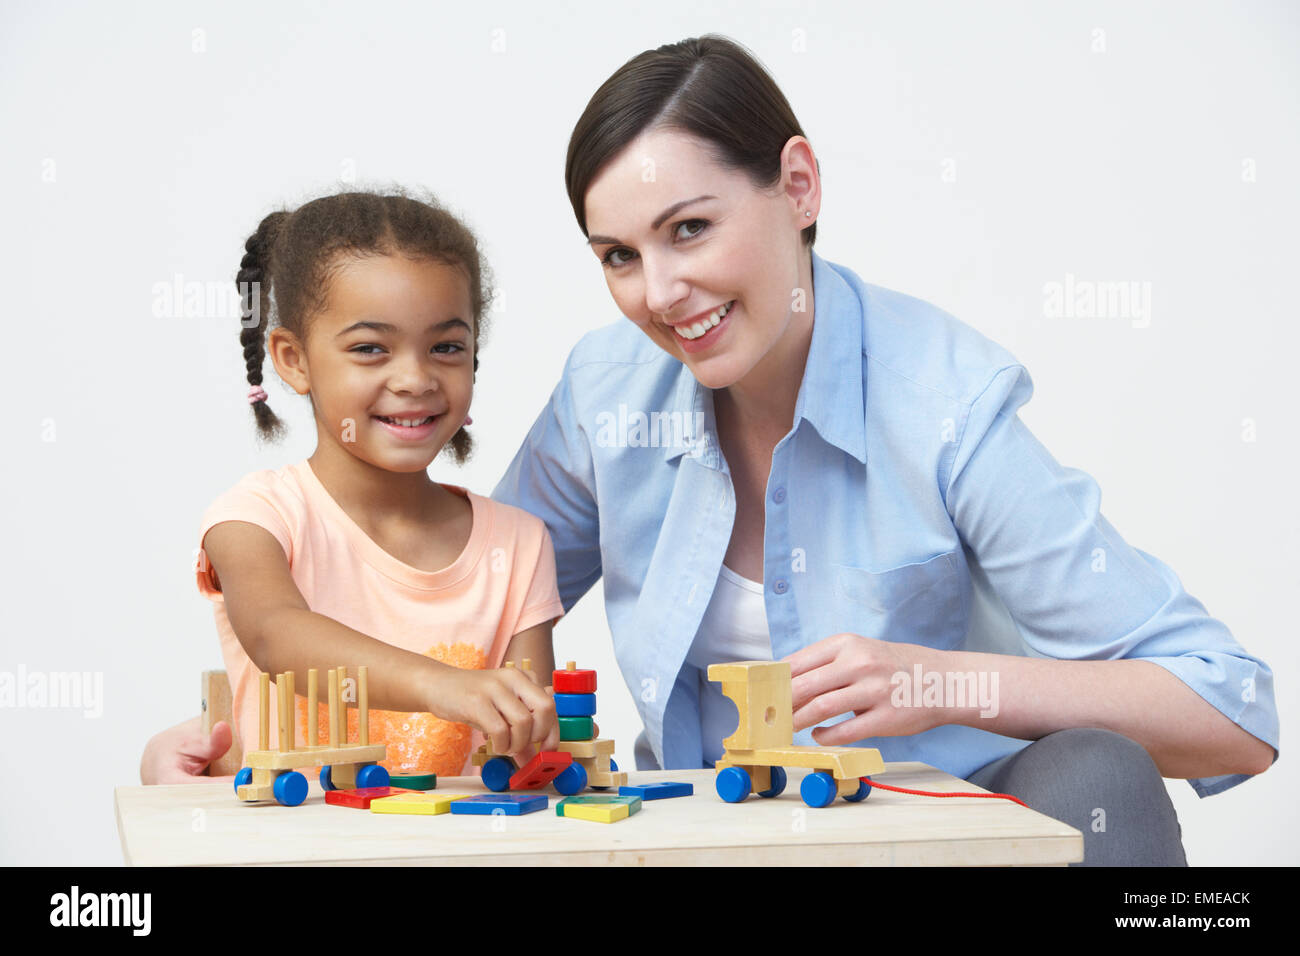 Teacher And Pre-School Pupil Playing With Wooden House Stock Photo